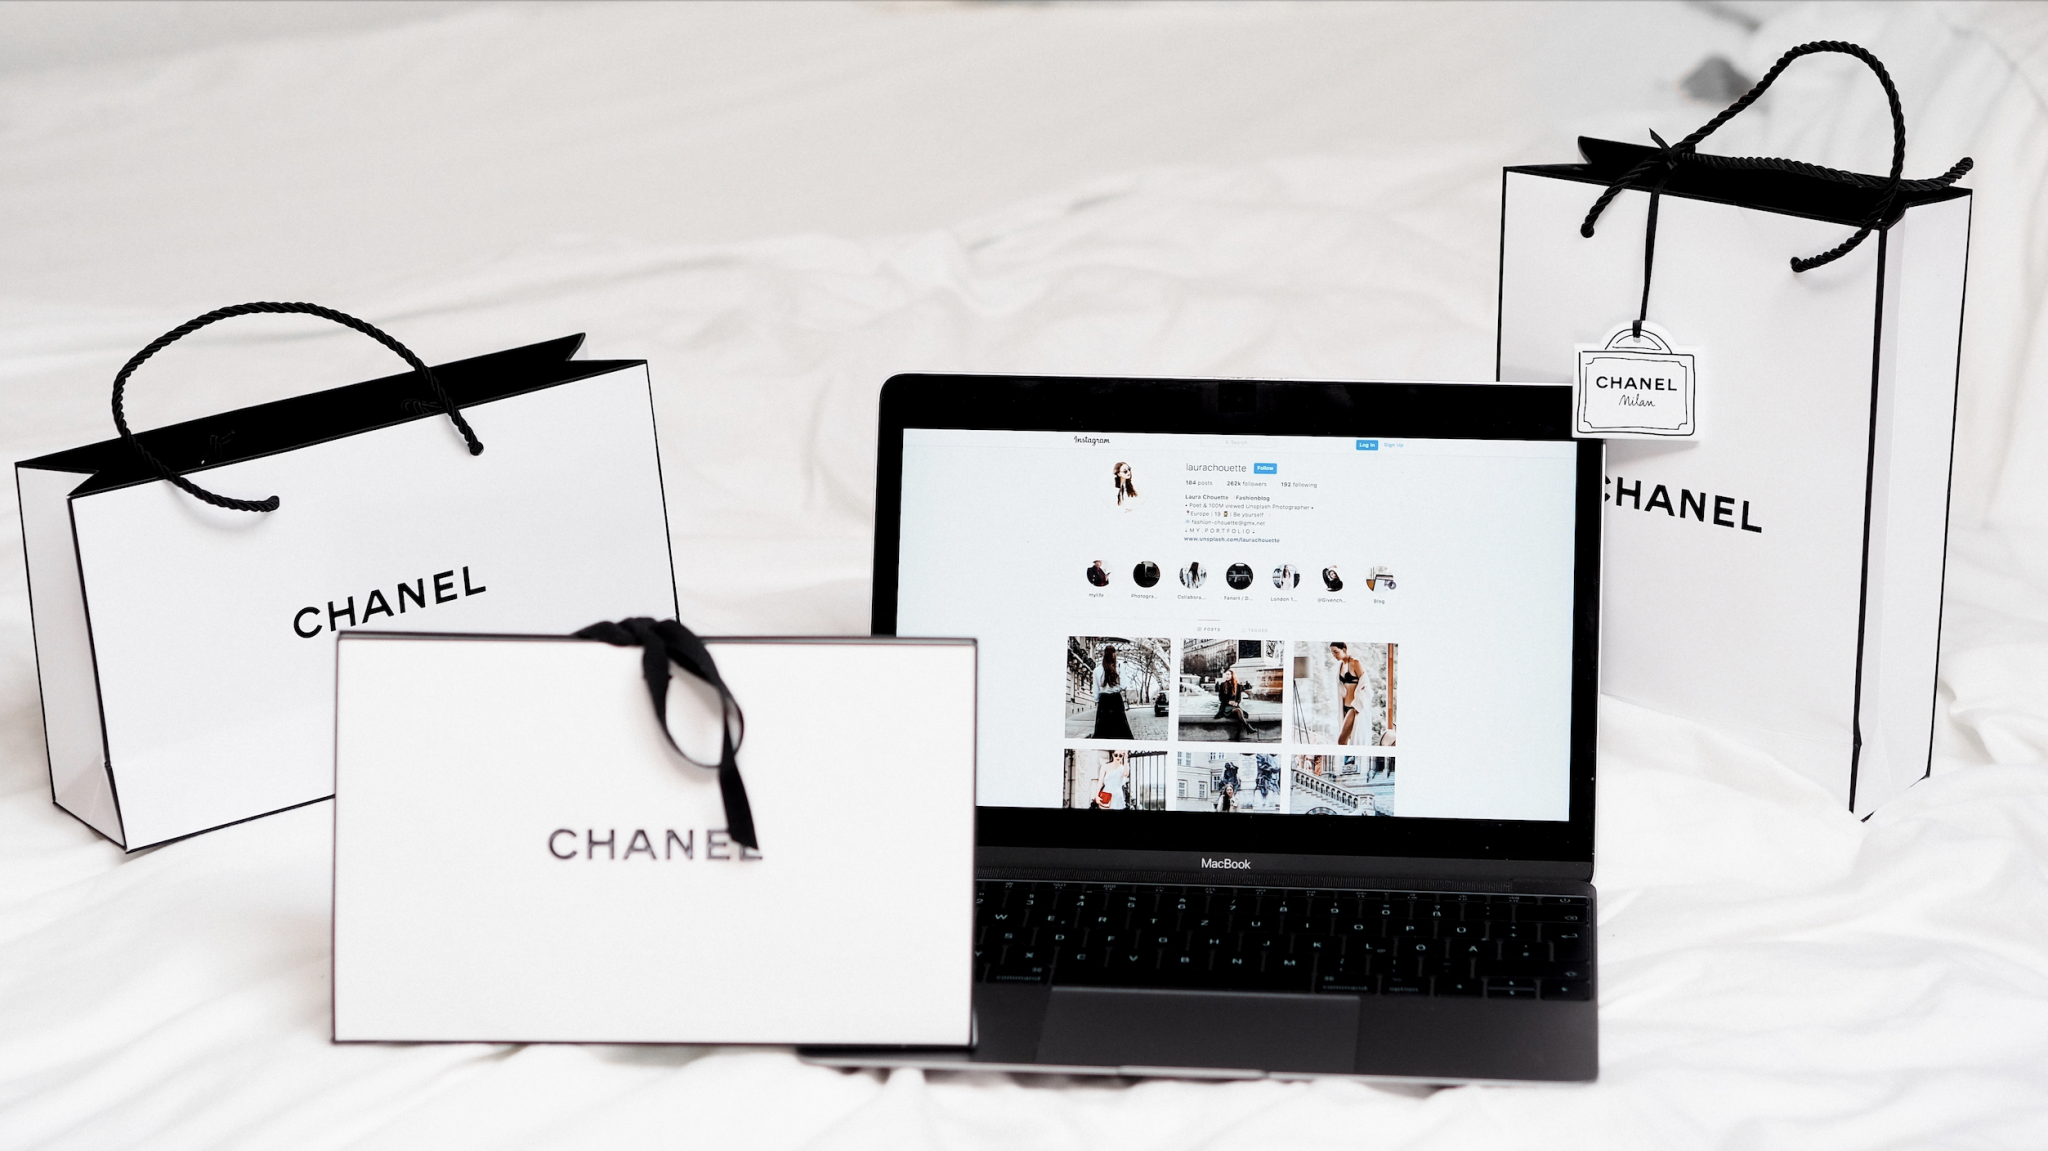 chanel bags with laptop on charlene trinsi blog